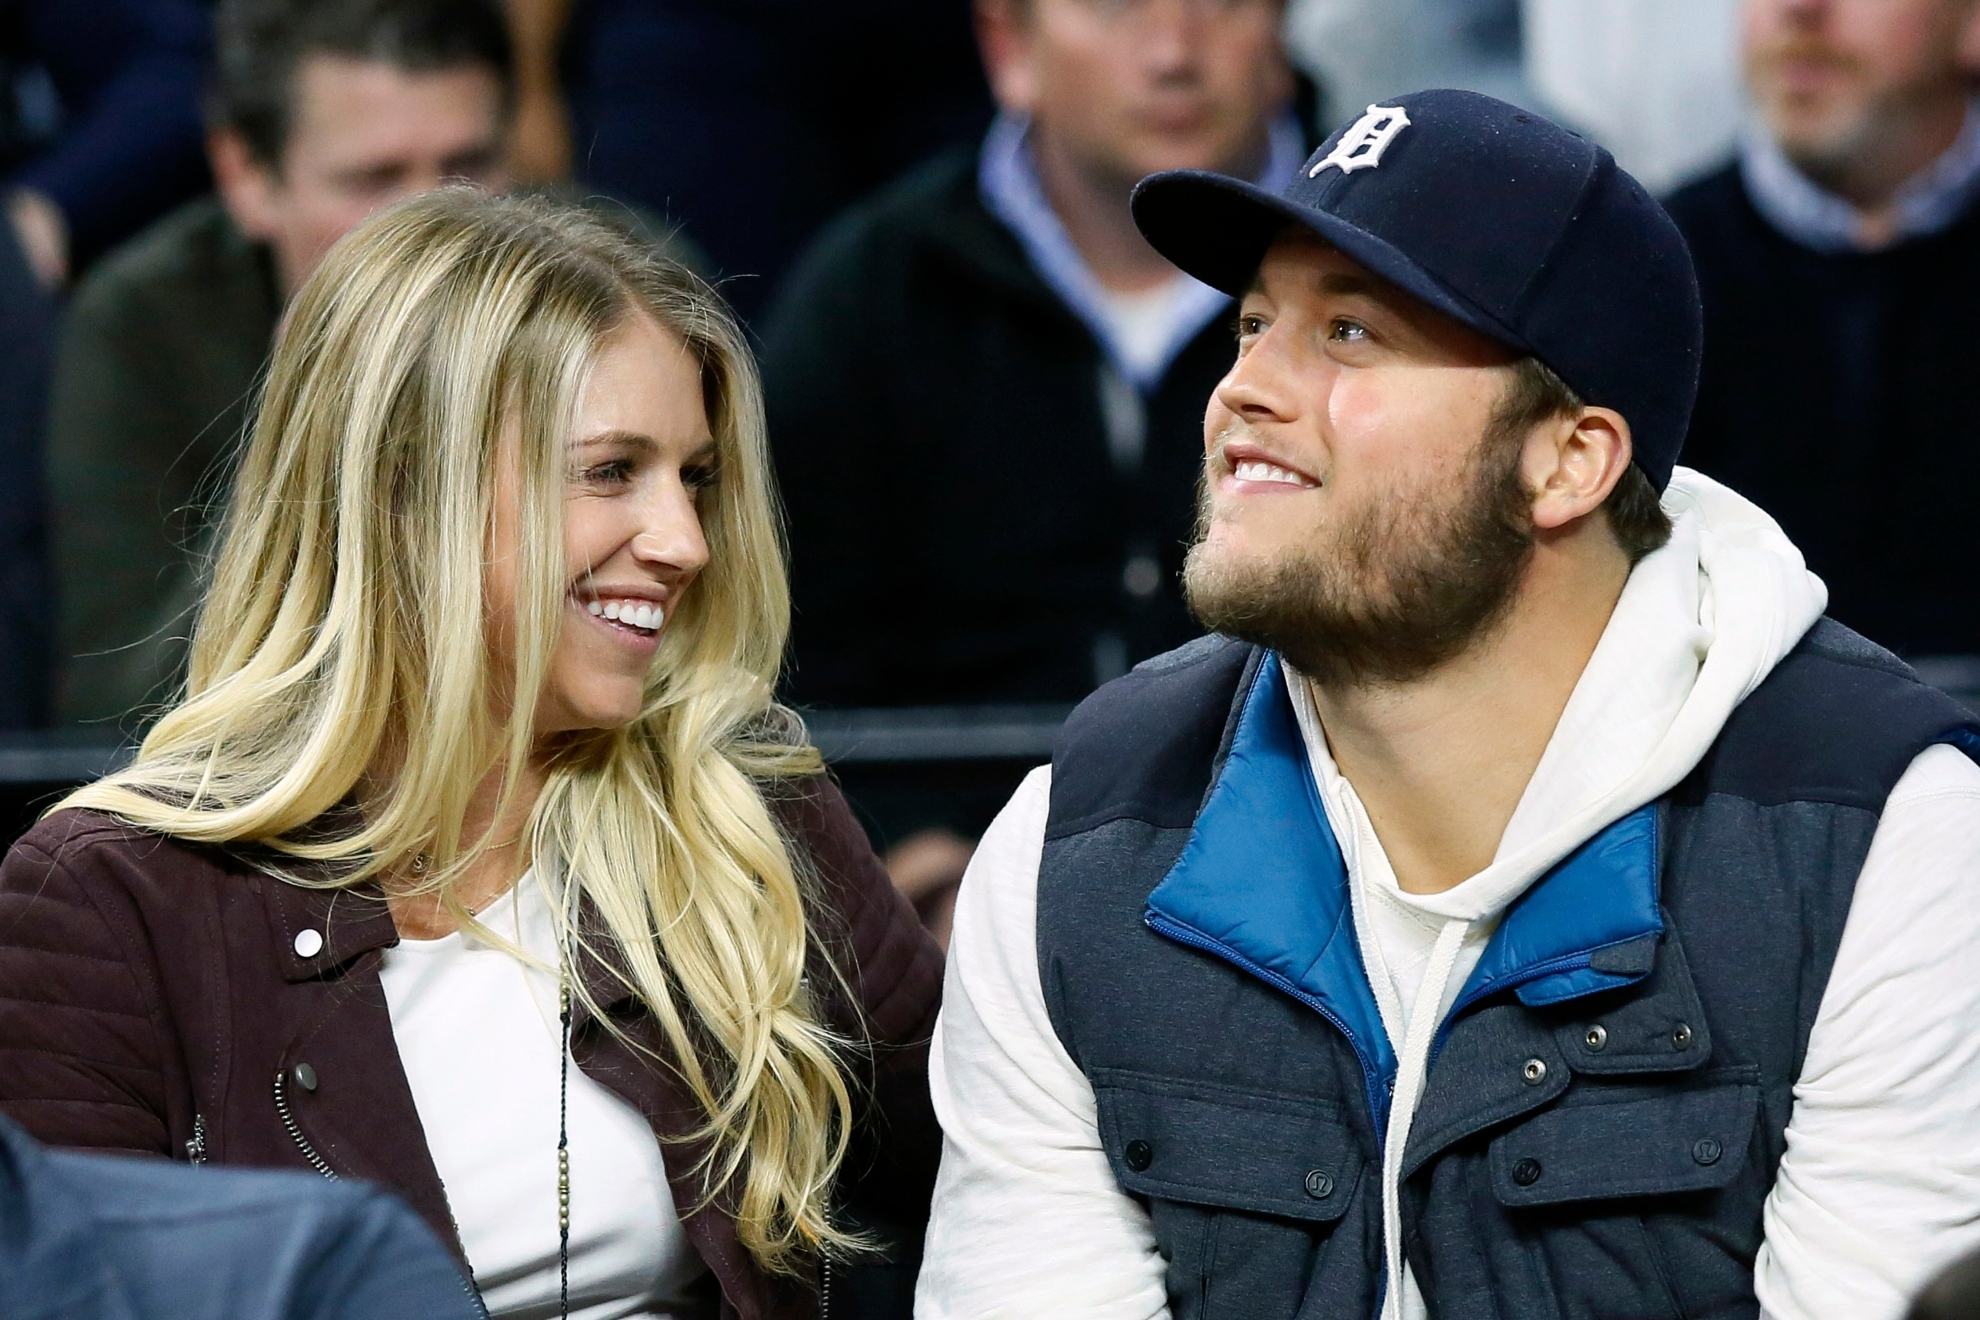 Matthew Stafford's struggle with younger Rams teammates